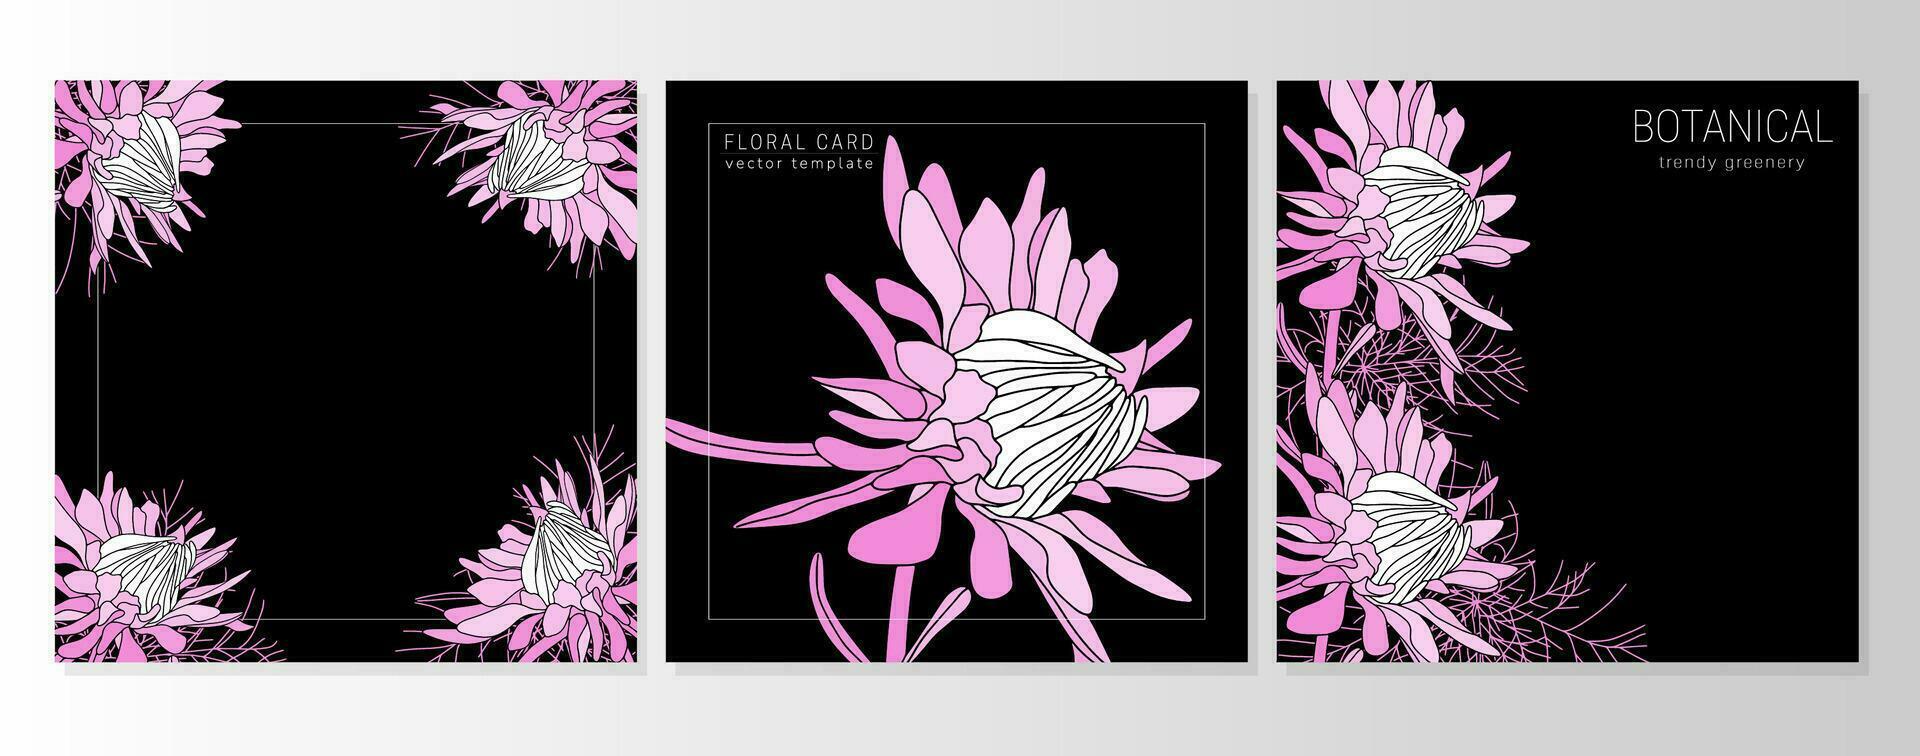 Set of greeting floral cards, botanical backgrounds, covers with fall pink asters, daisies vector